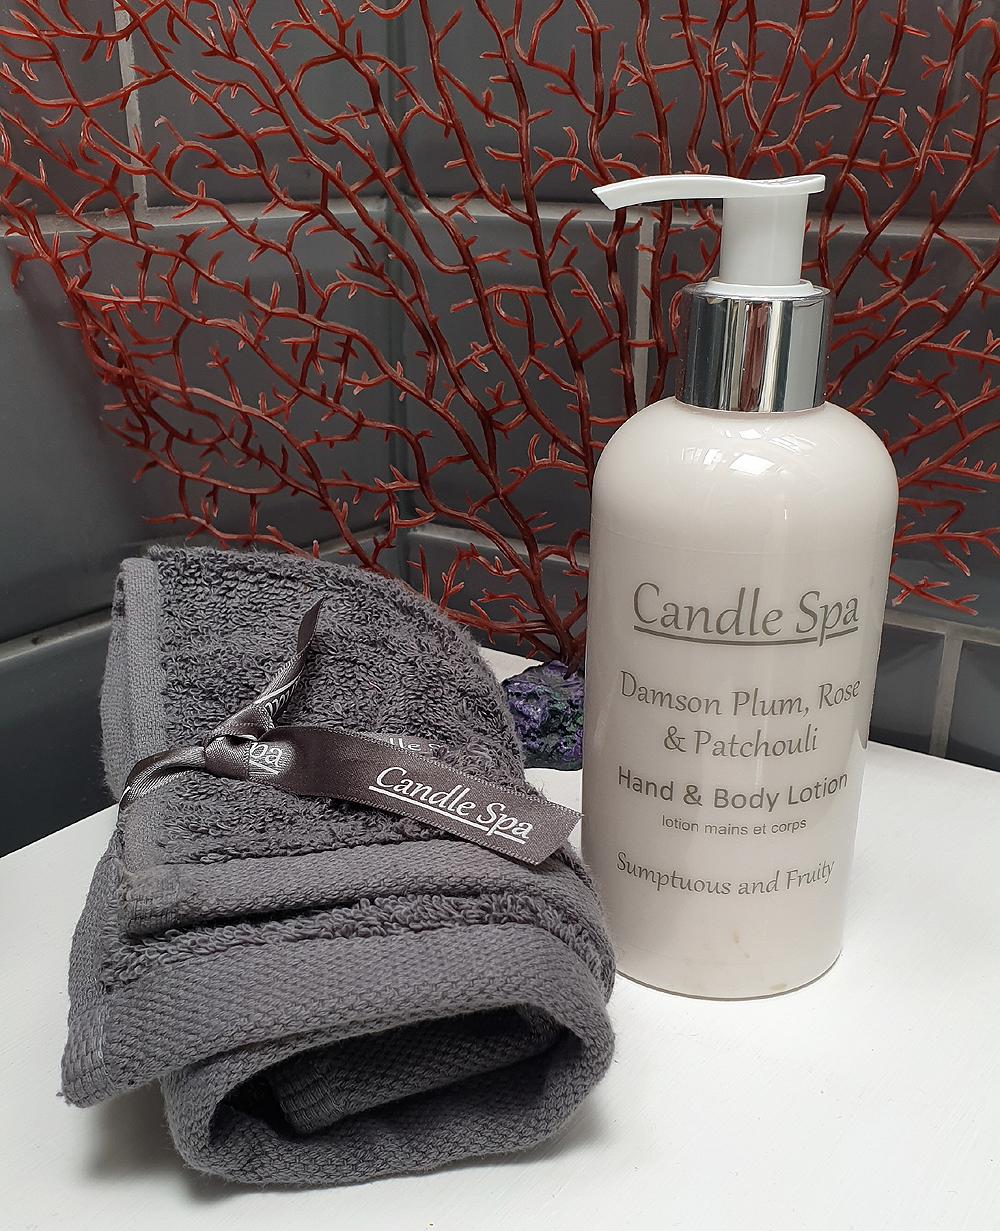 Candle Spa Hand & Body Lotion 250ml - Damson Plum, Rose & Patchouli